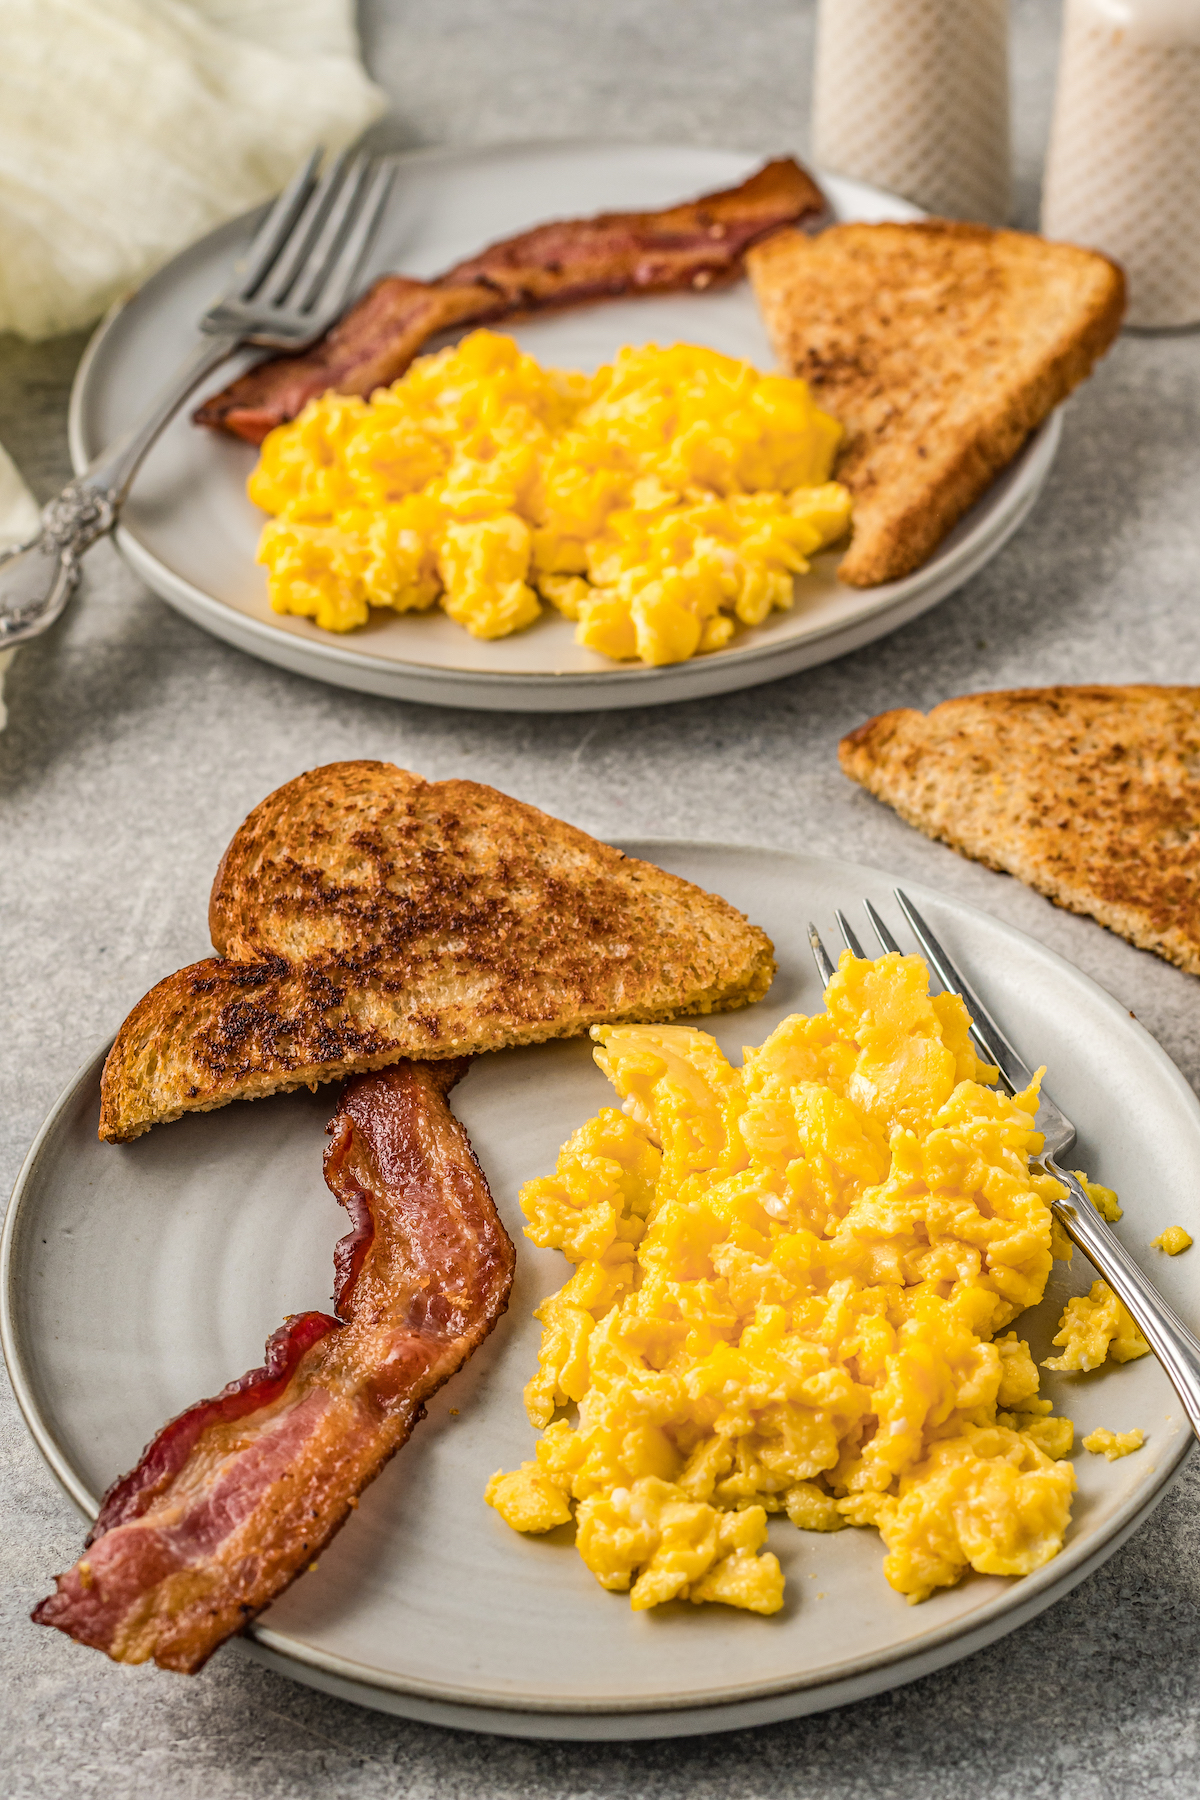 Two plates of stove top scrambled eggs with slices of toast and bacon.